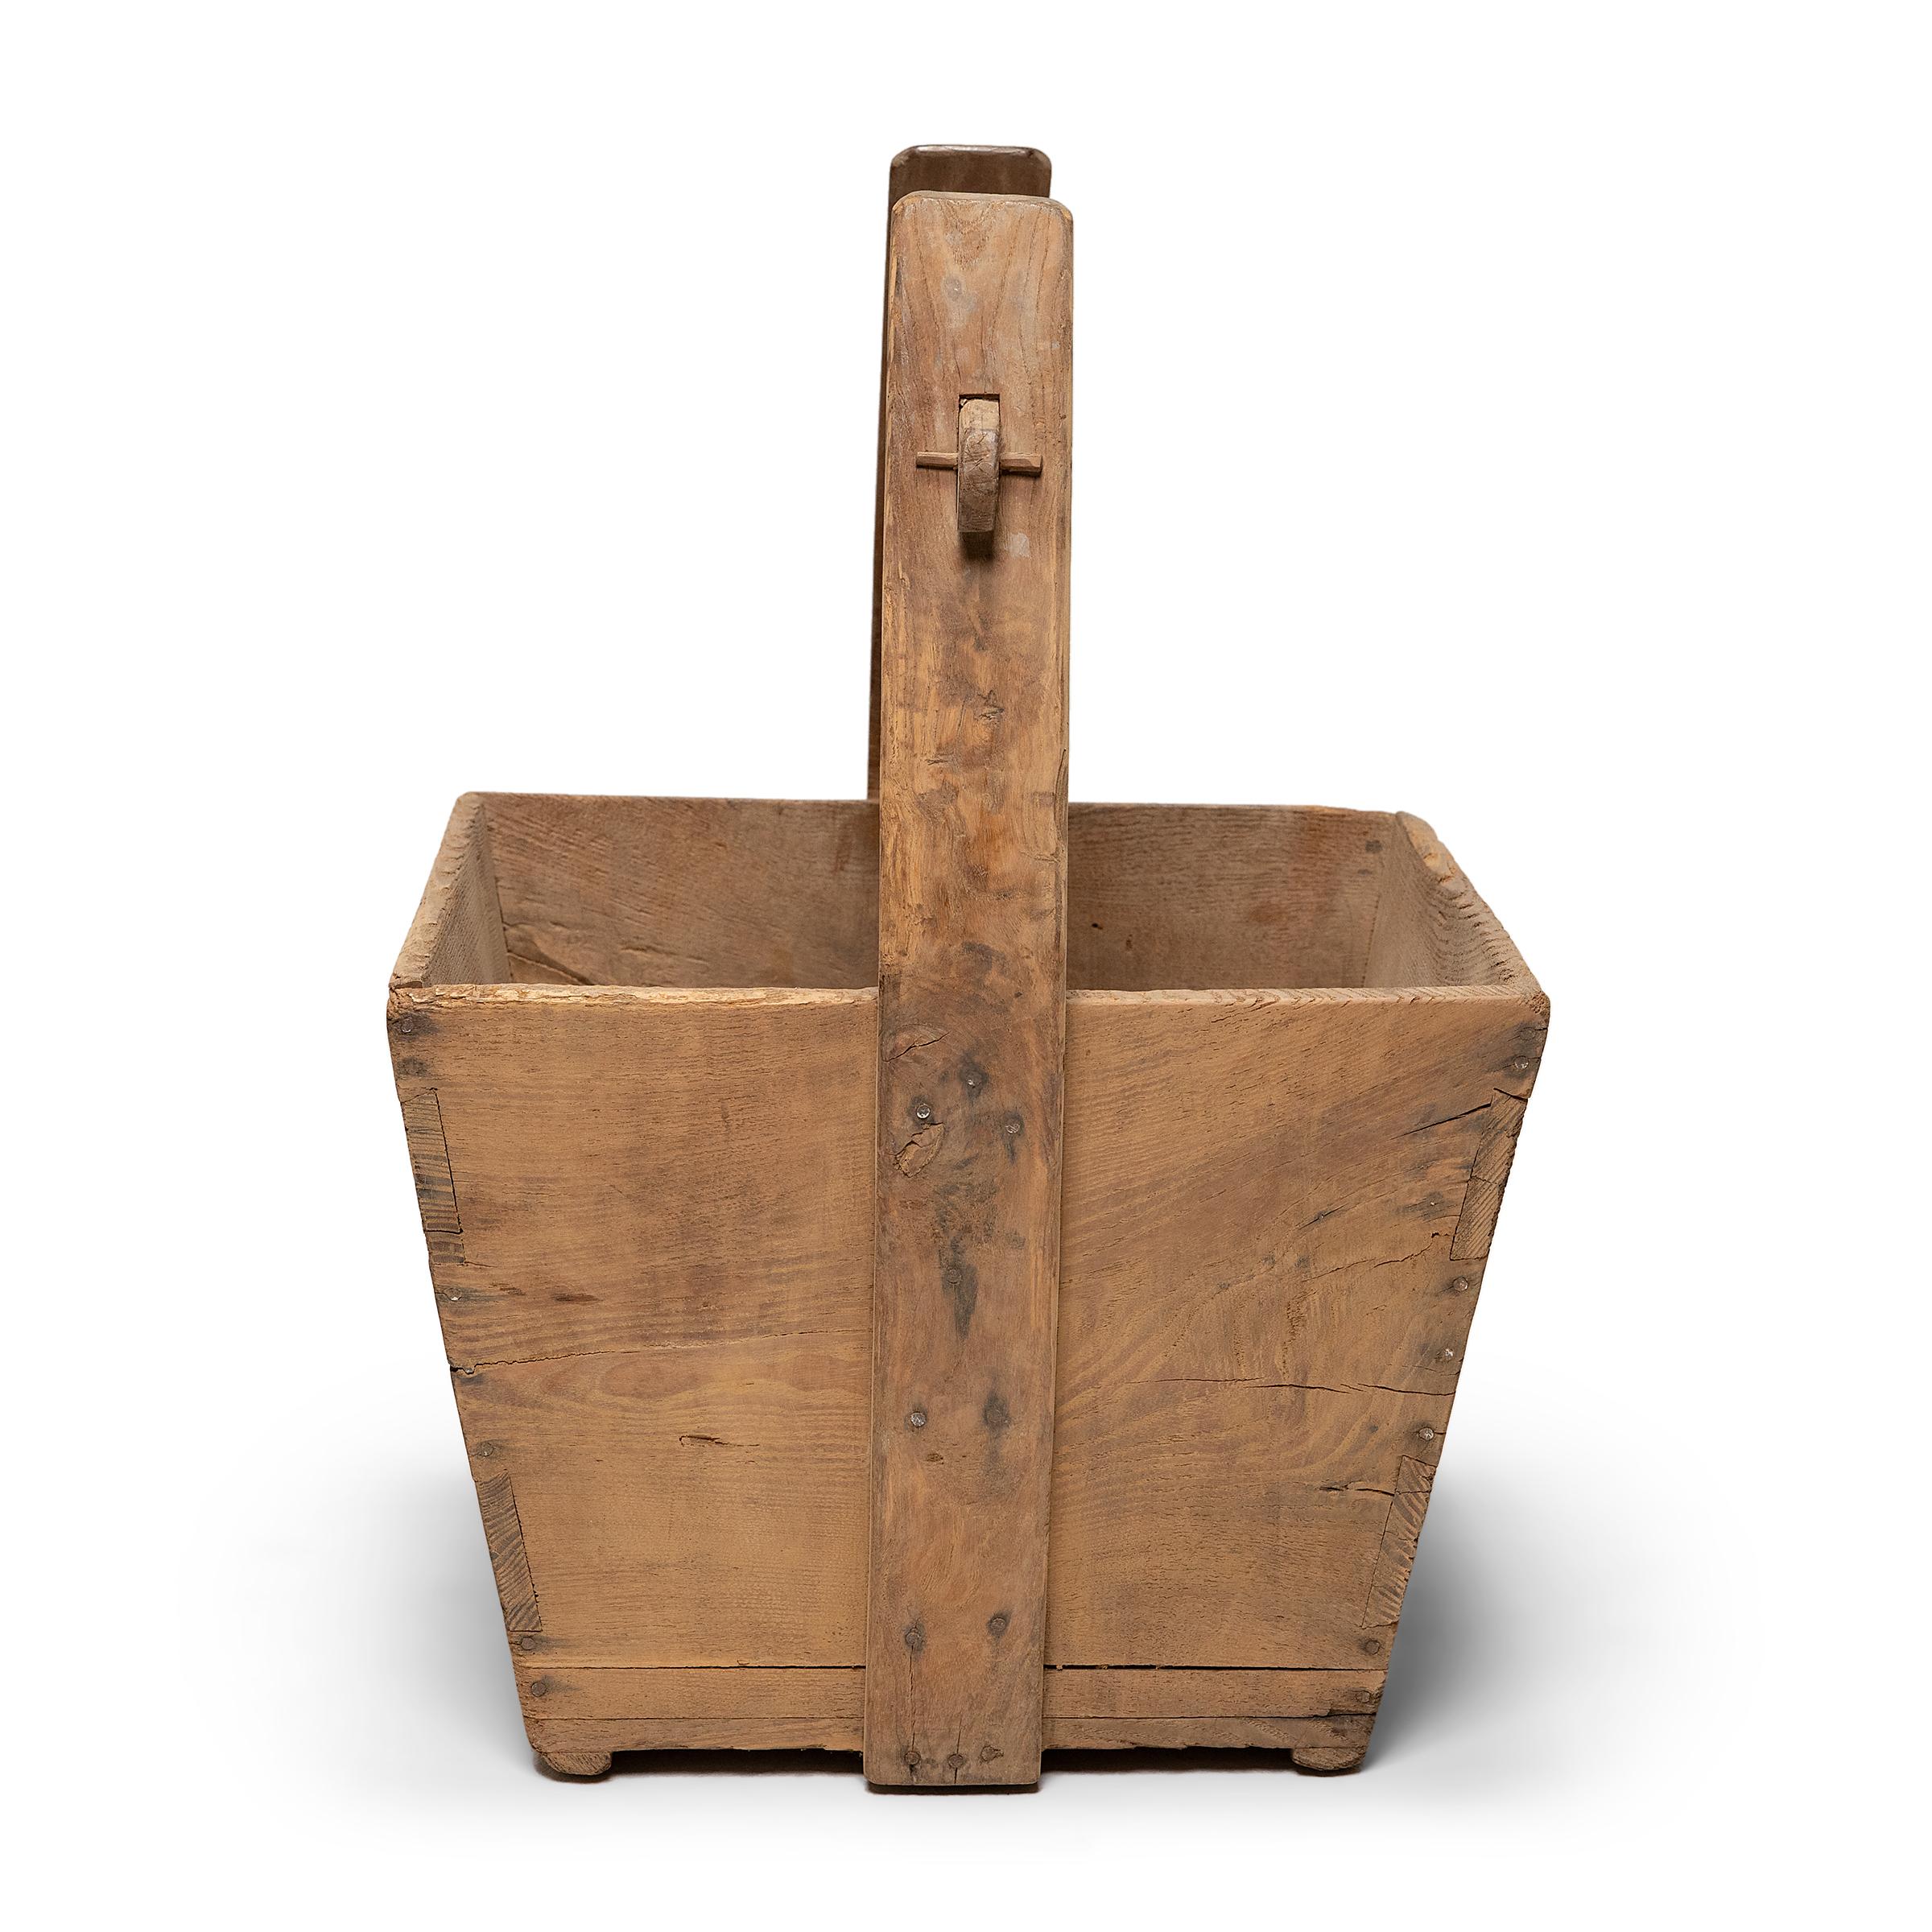 Rustic Chinese Provincial Grain Container, c. 1900